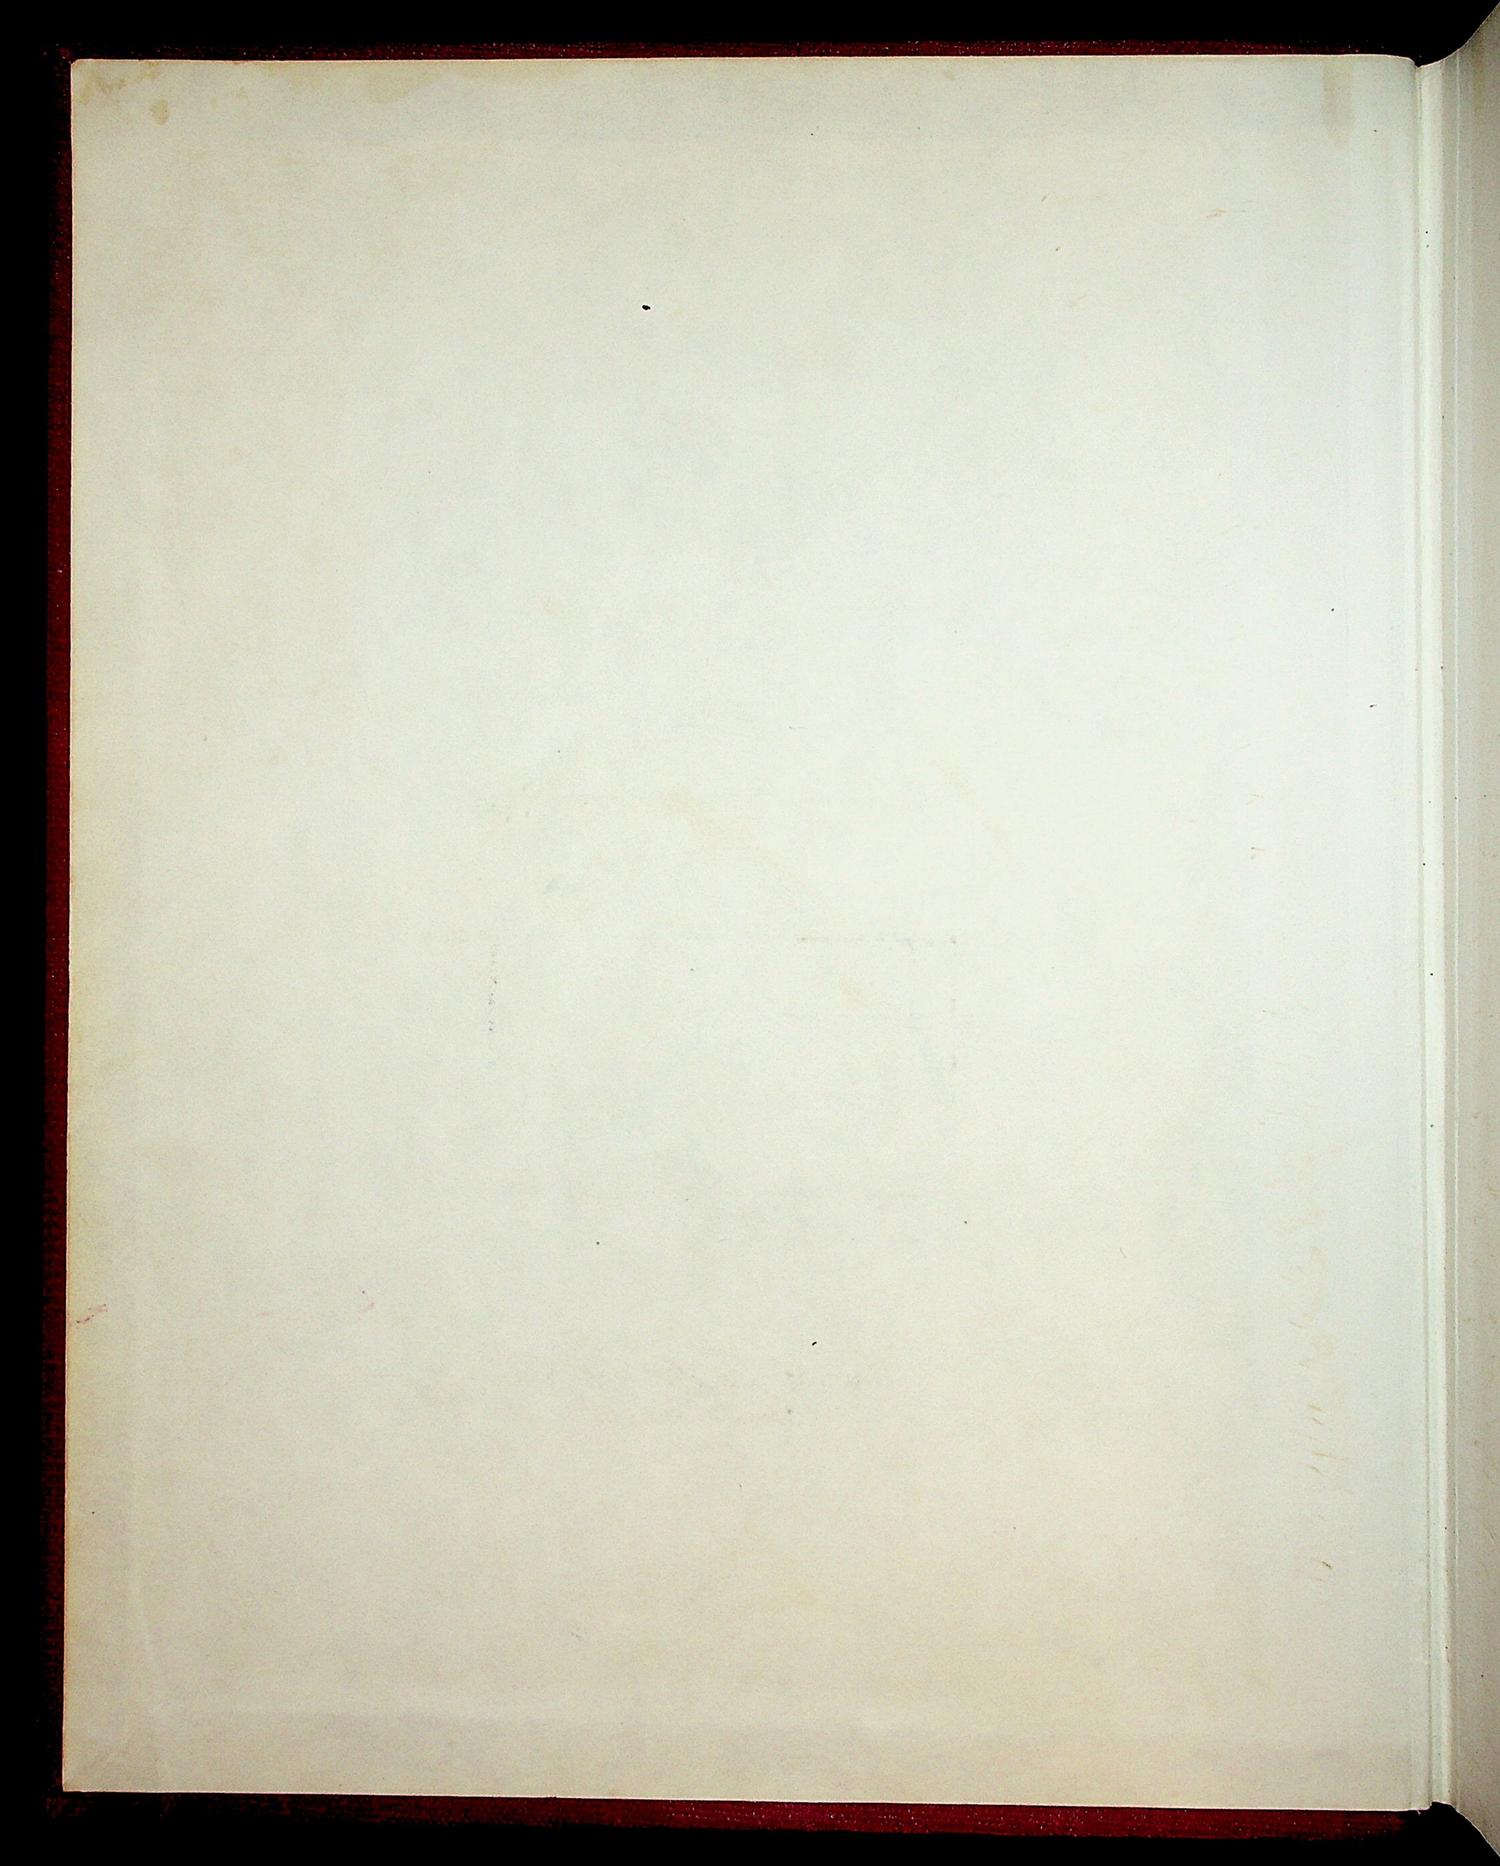 A Social History of Baytown, Texas, 1912-1956
                                                
                                                    Front Inside
                                                